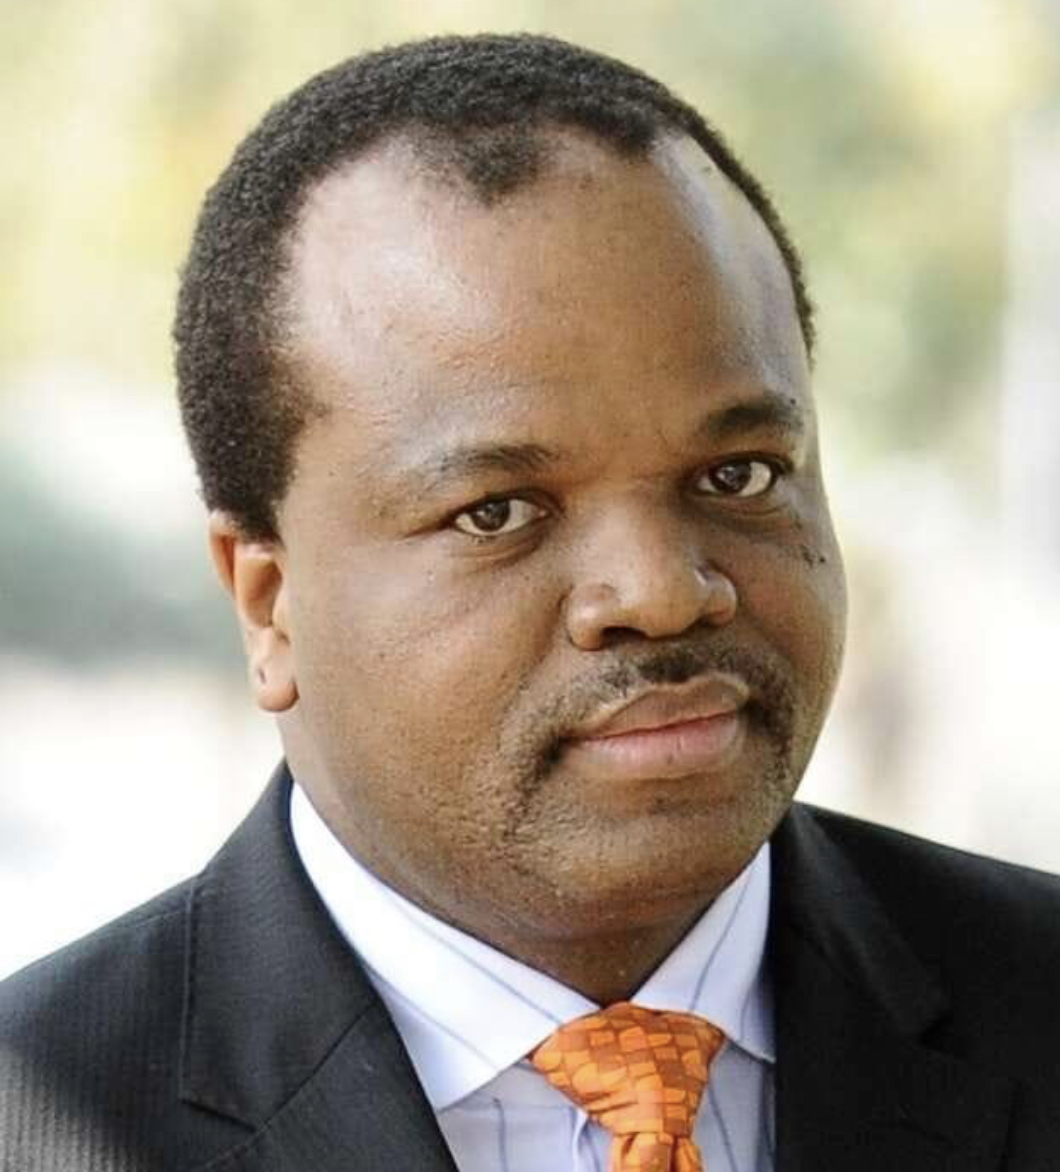 ESWATINI UNREST: Documented contradicting statements by Mswati, his government on the killing of civilians.